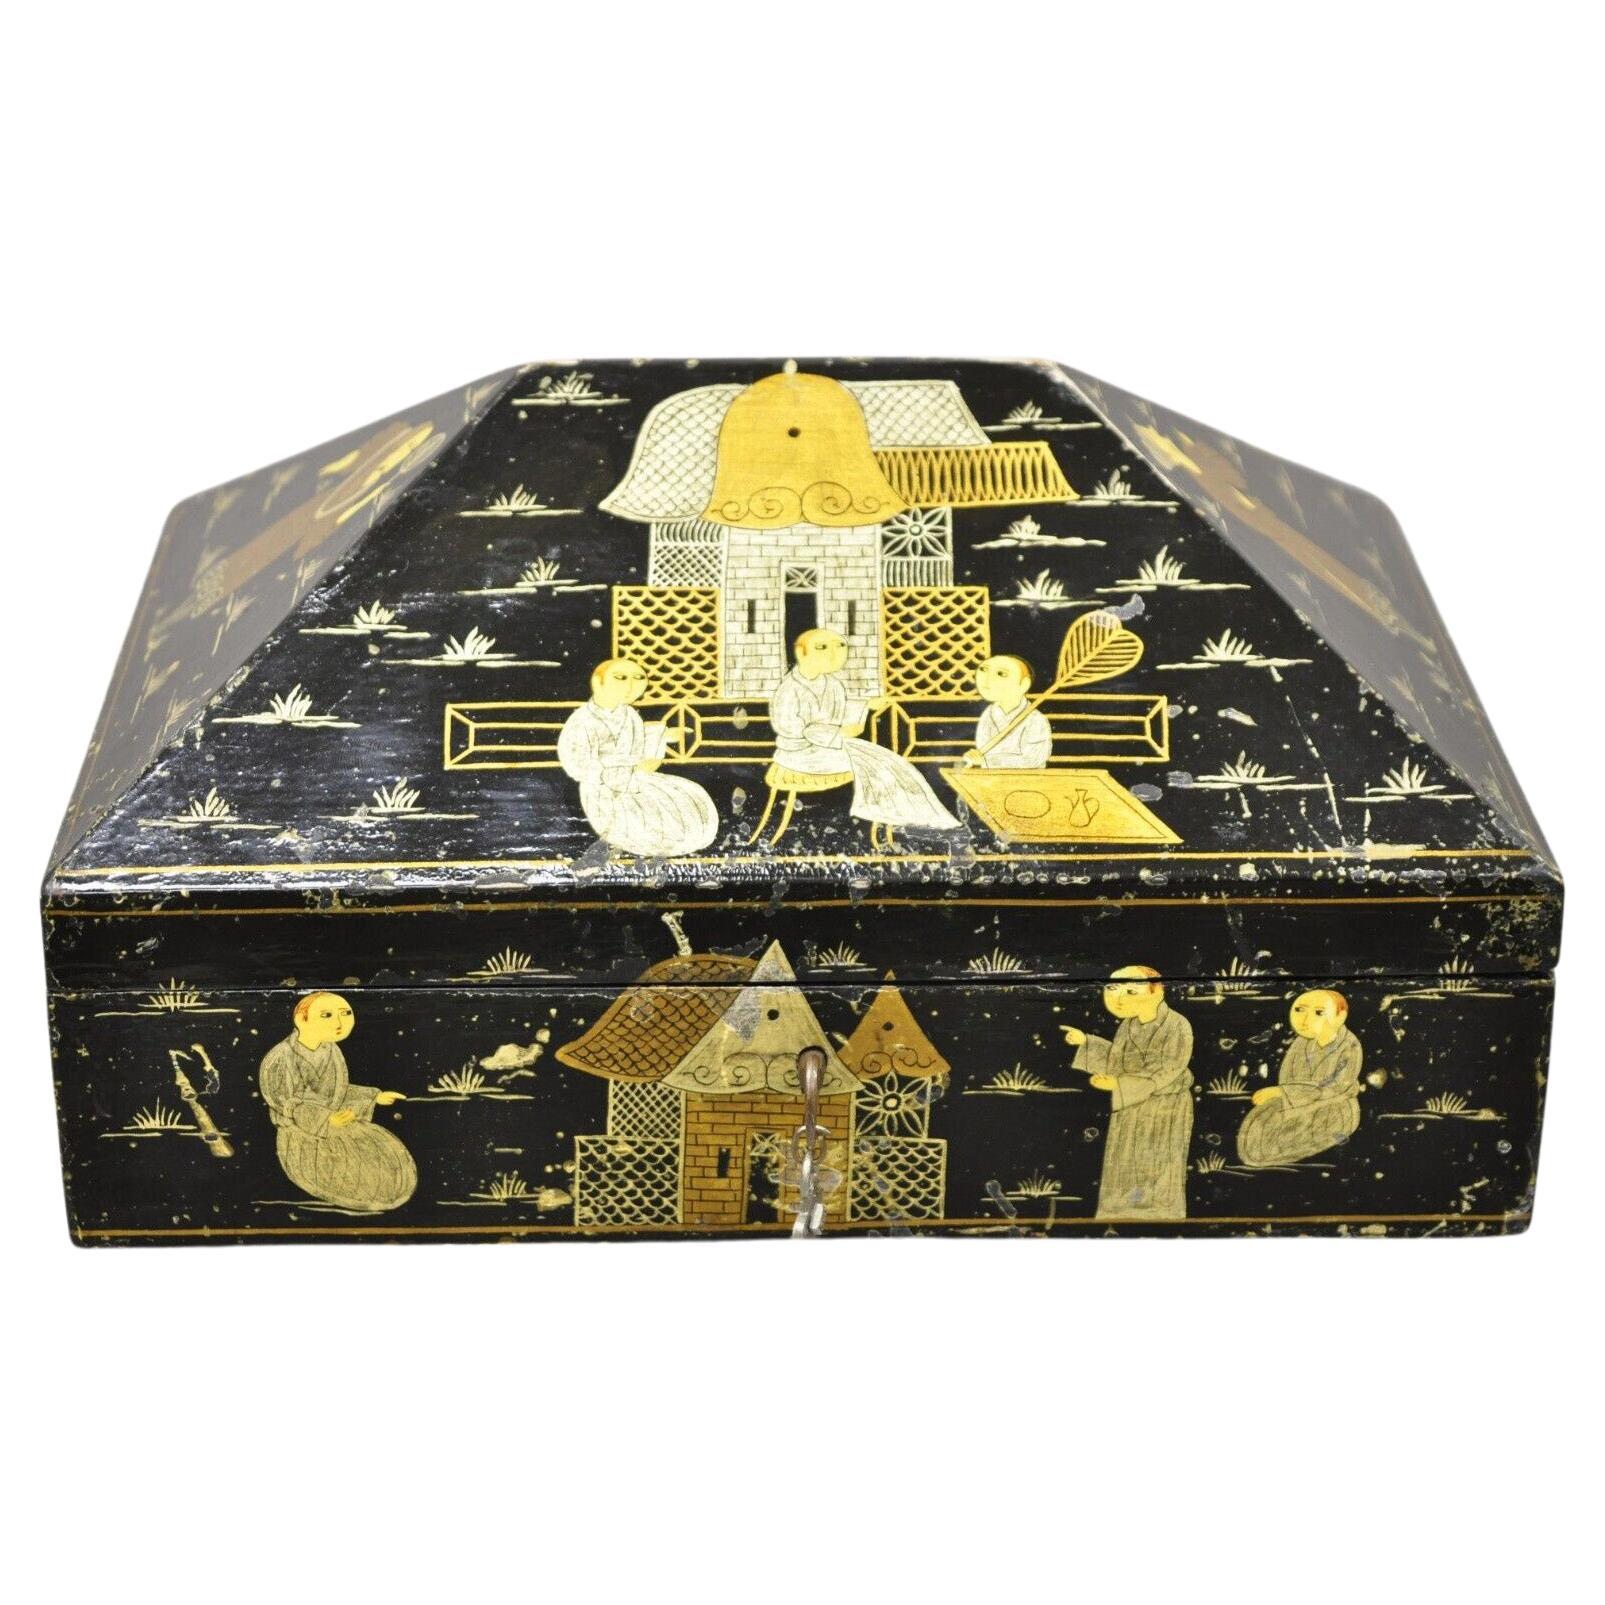 Vintage Black Lacquer Chinese Oriental Figural Pyramid Pagoda Jewelry Box